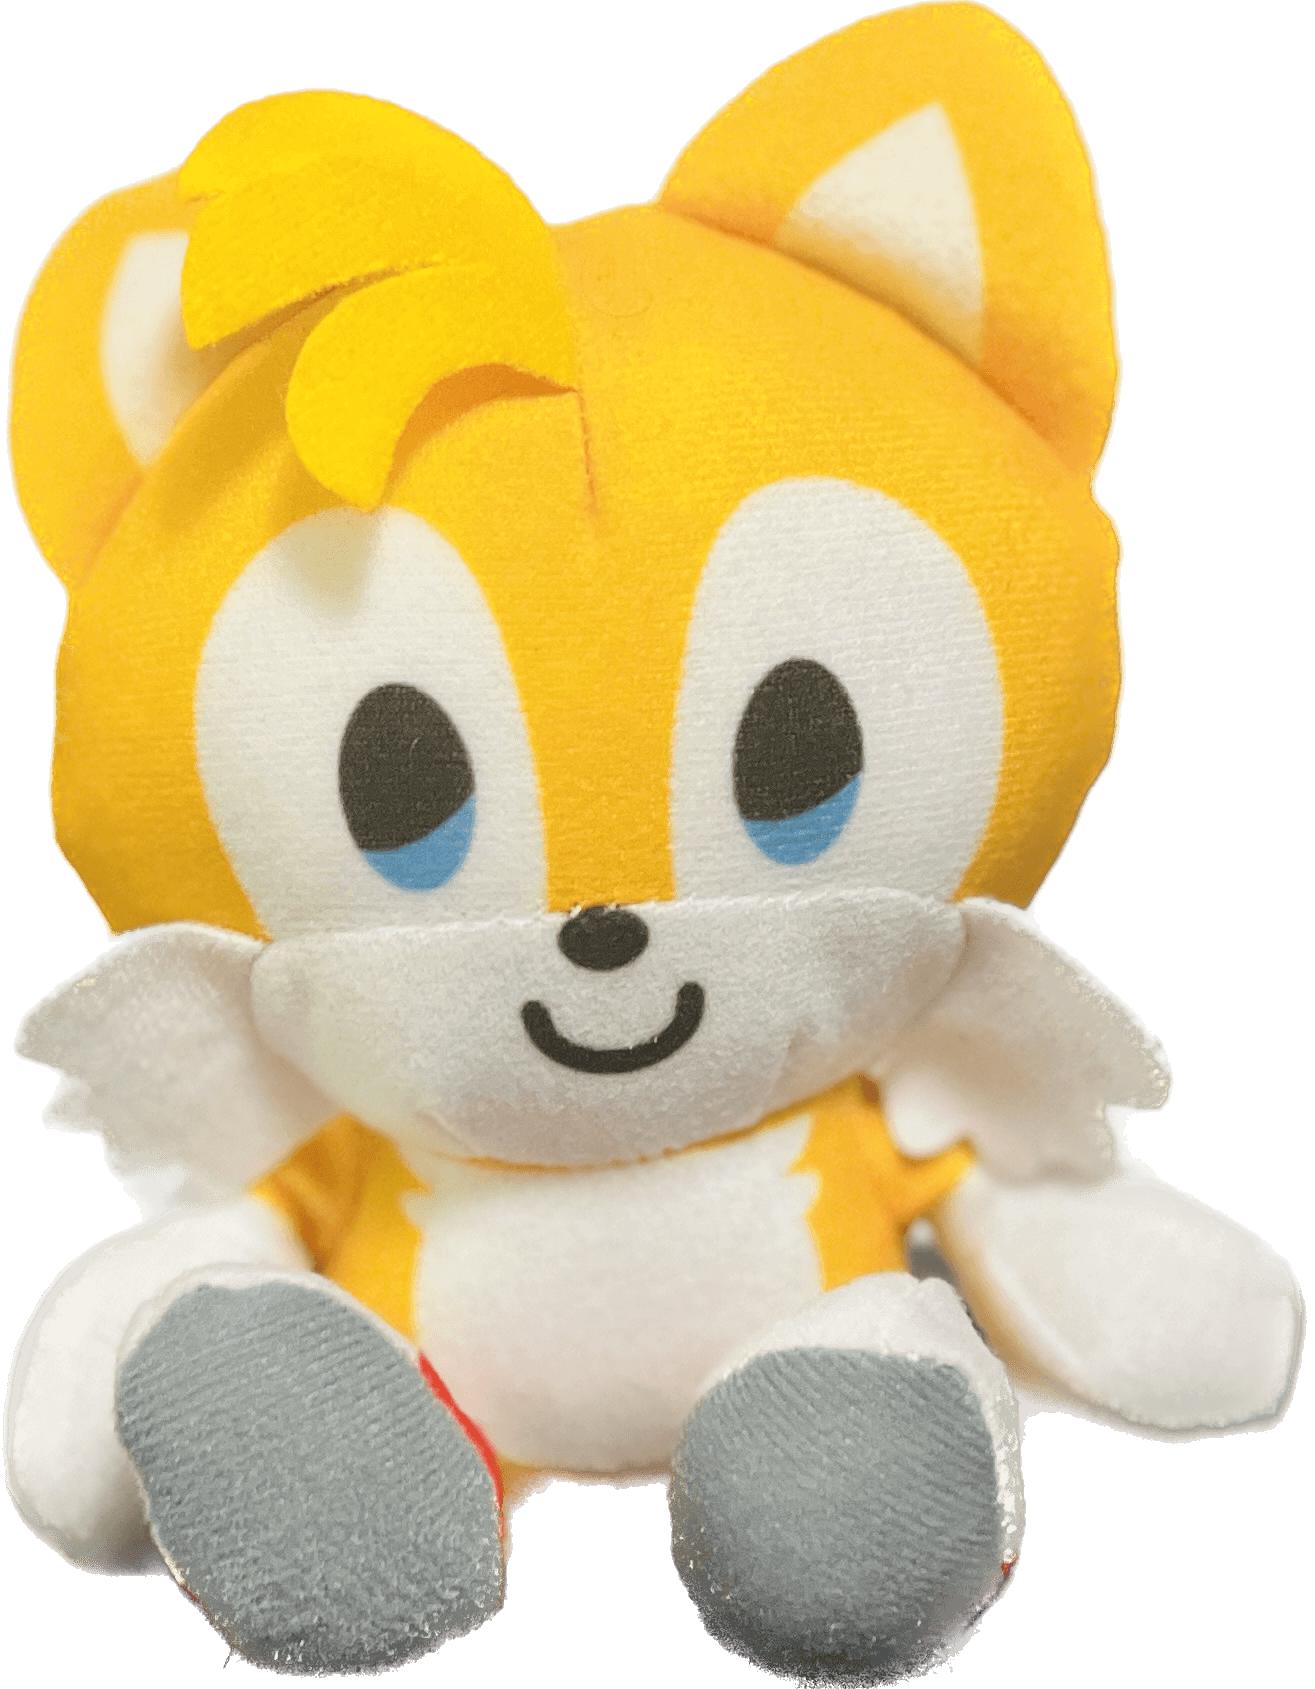 A plushie of Tails from the Sonic the Hedgehog series!